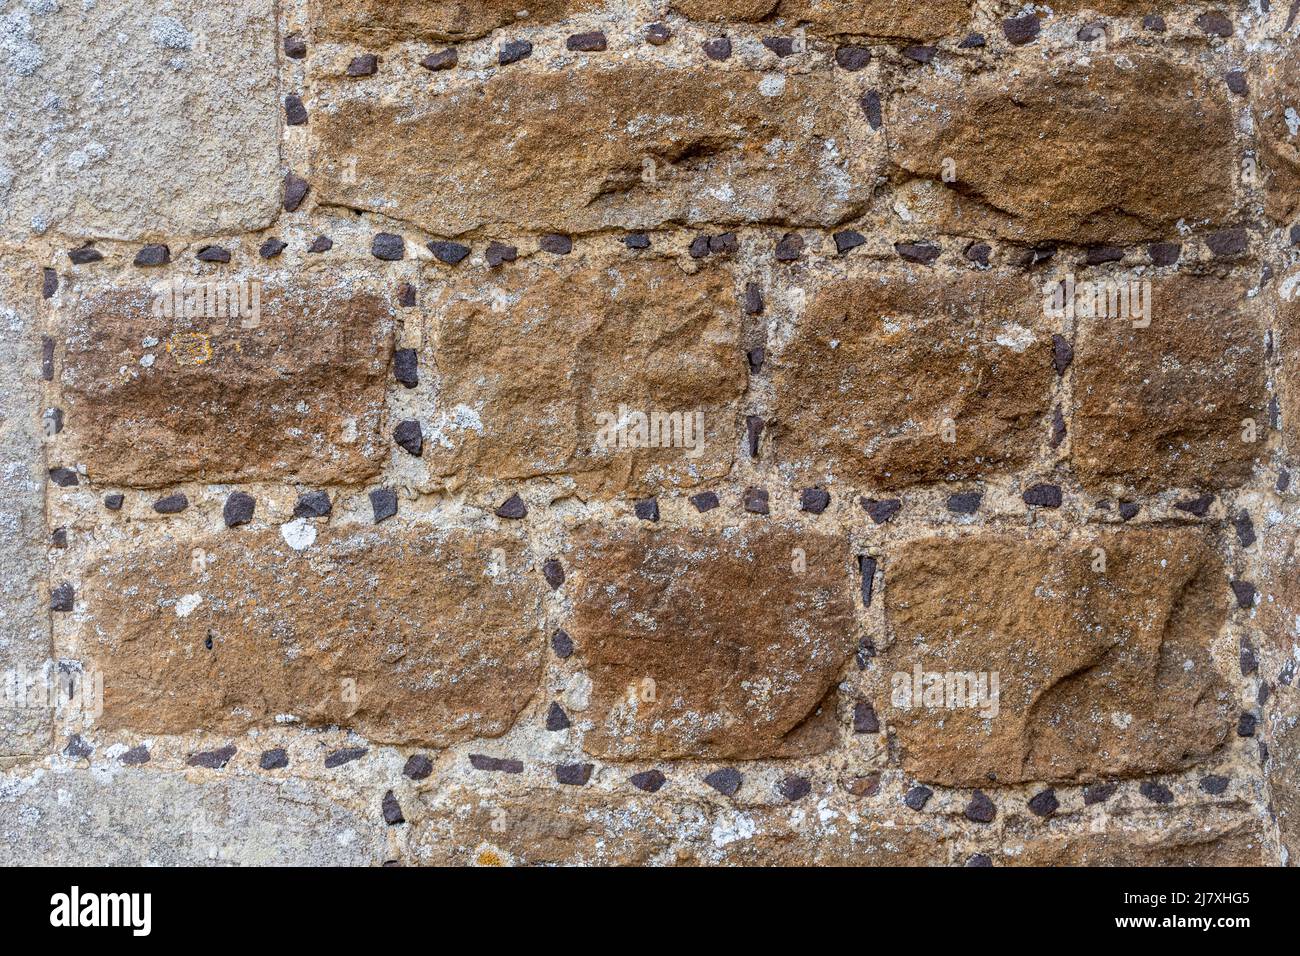 Wall showing galleting (also called garreting or garneting), an architectural technique where small pieces of stone are pushed into wet mortar, UK Stock Photo